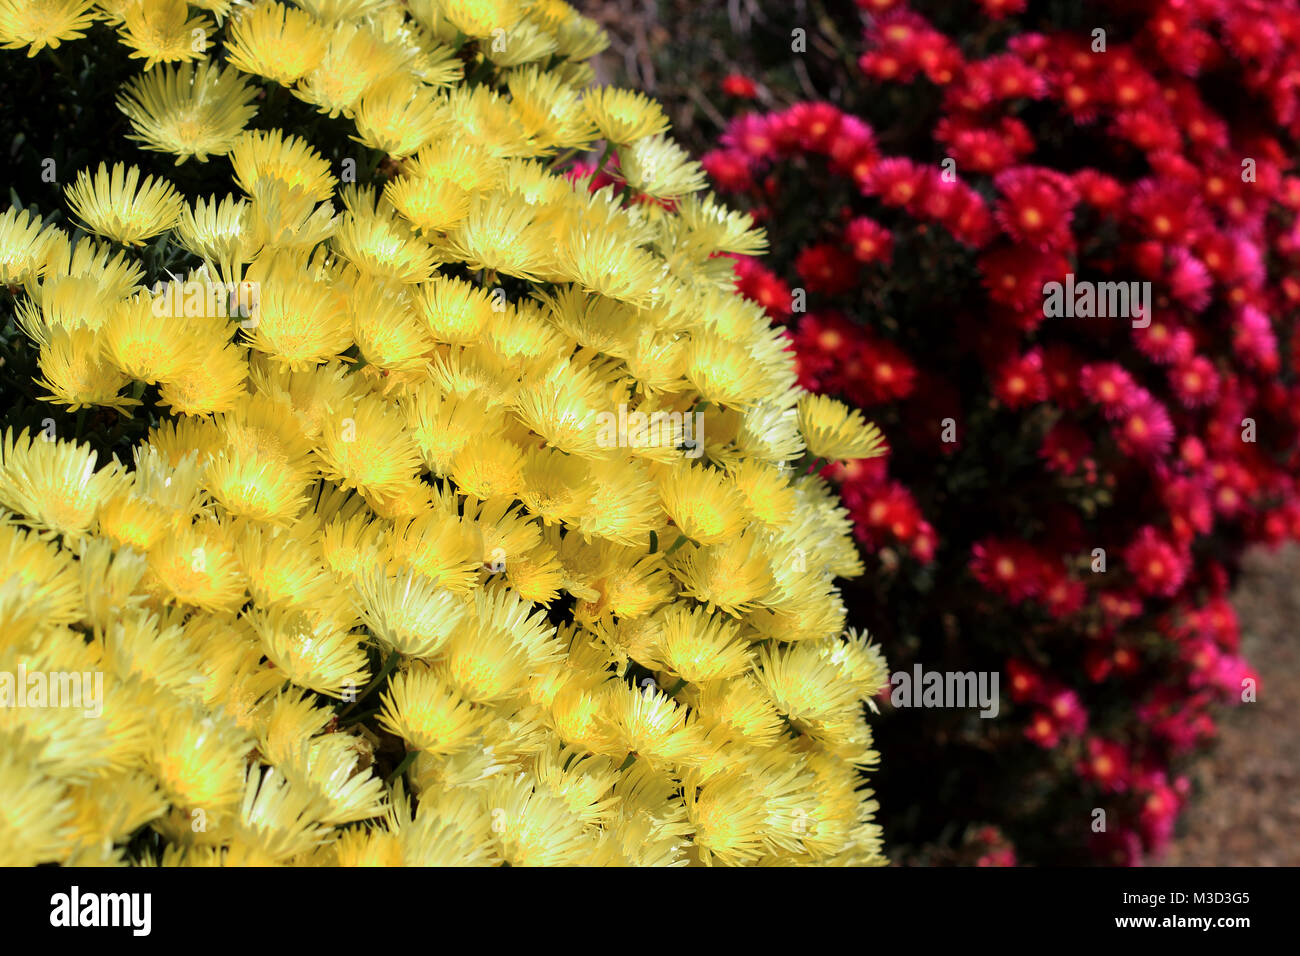 Red and yellow Pig face flowers or Mesembryanthemum, ice plant flowers, Livingstone Daisies in full bloom Stock Photo